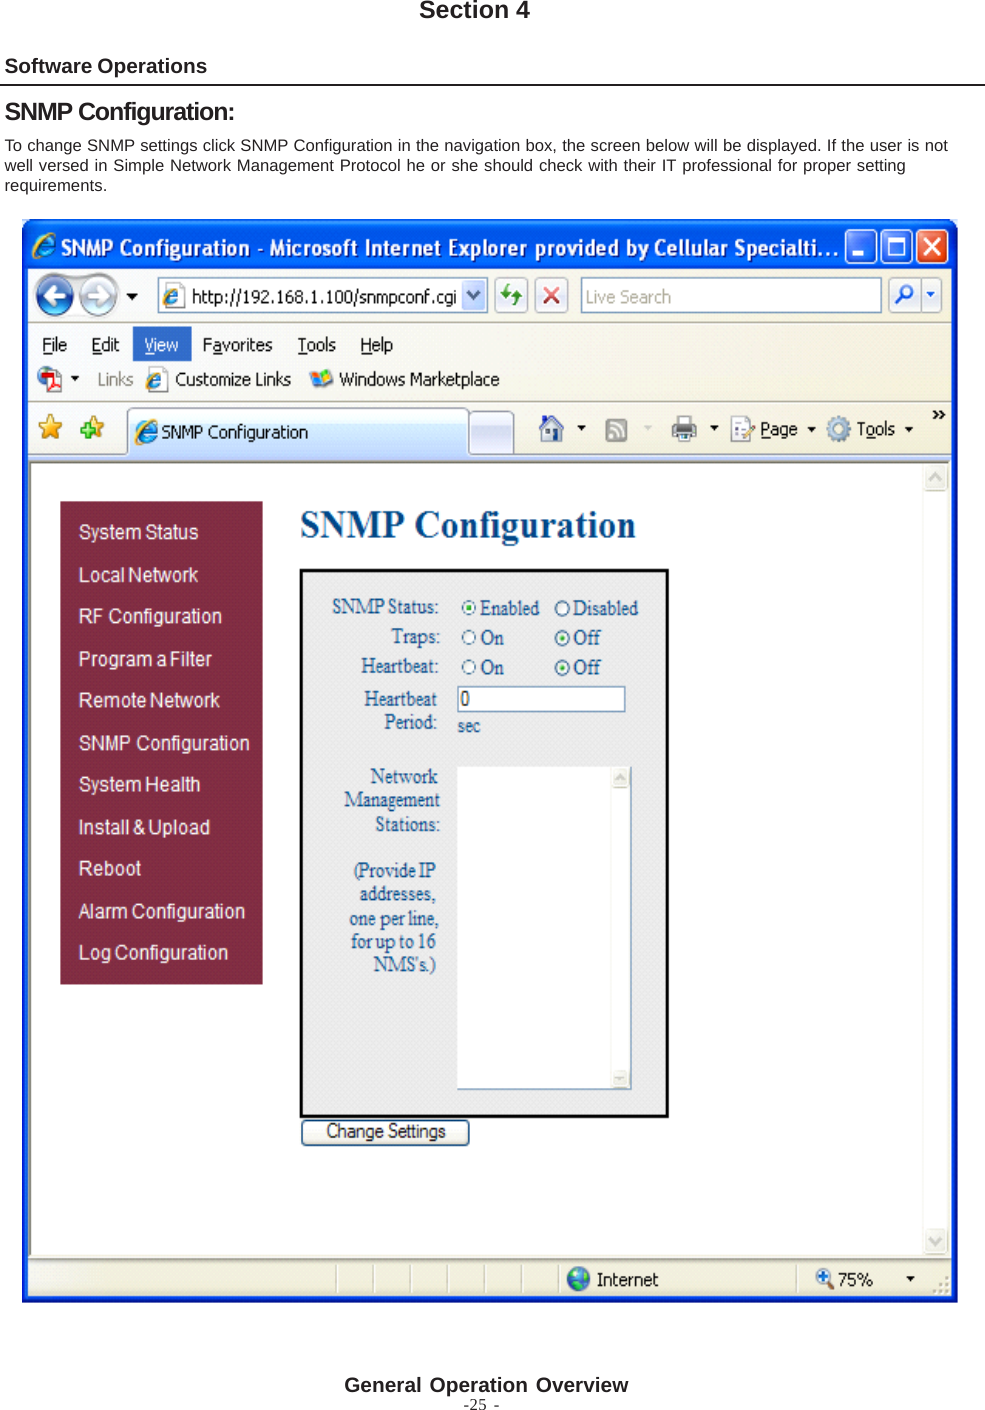 -25 -Software OperationsSection 4To change SNMP settings click SNMP Configuration in the navigation box, the screen below will be displayed. If the user is notwell versed in Simple Network Management Protocol he or she should check with their IT professional for proper settingrequirements.SNMP Configuration:General Operation Overview